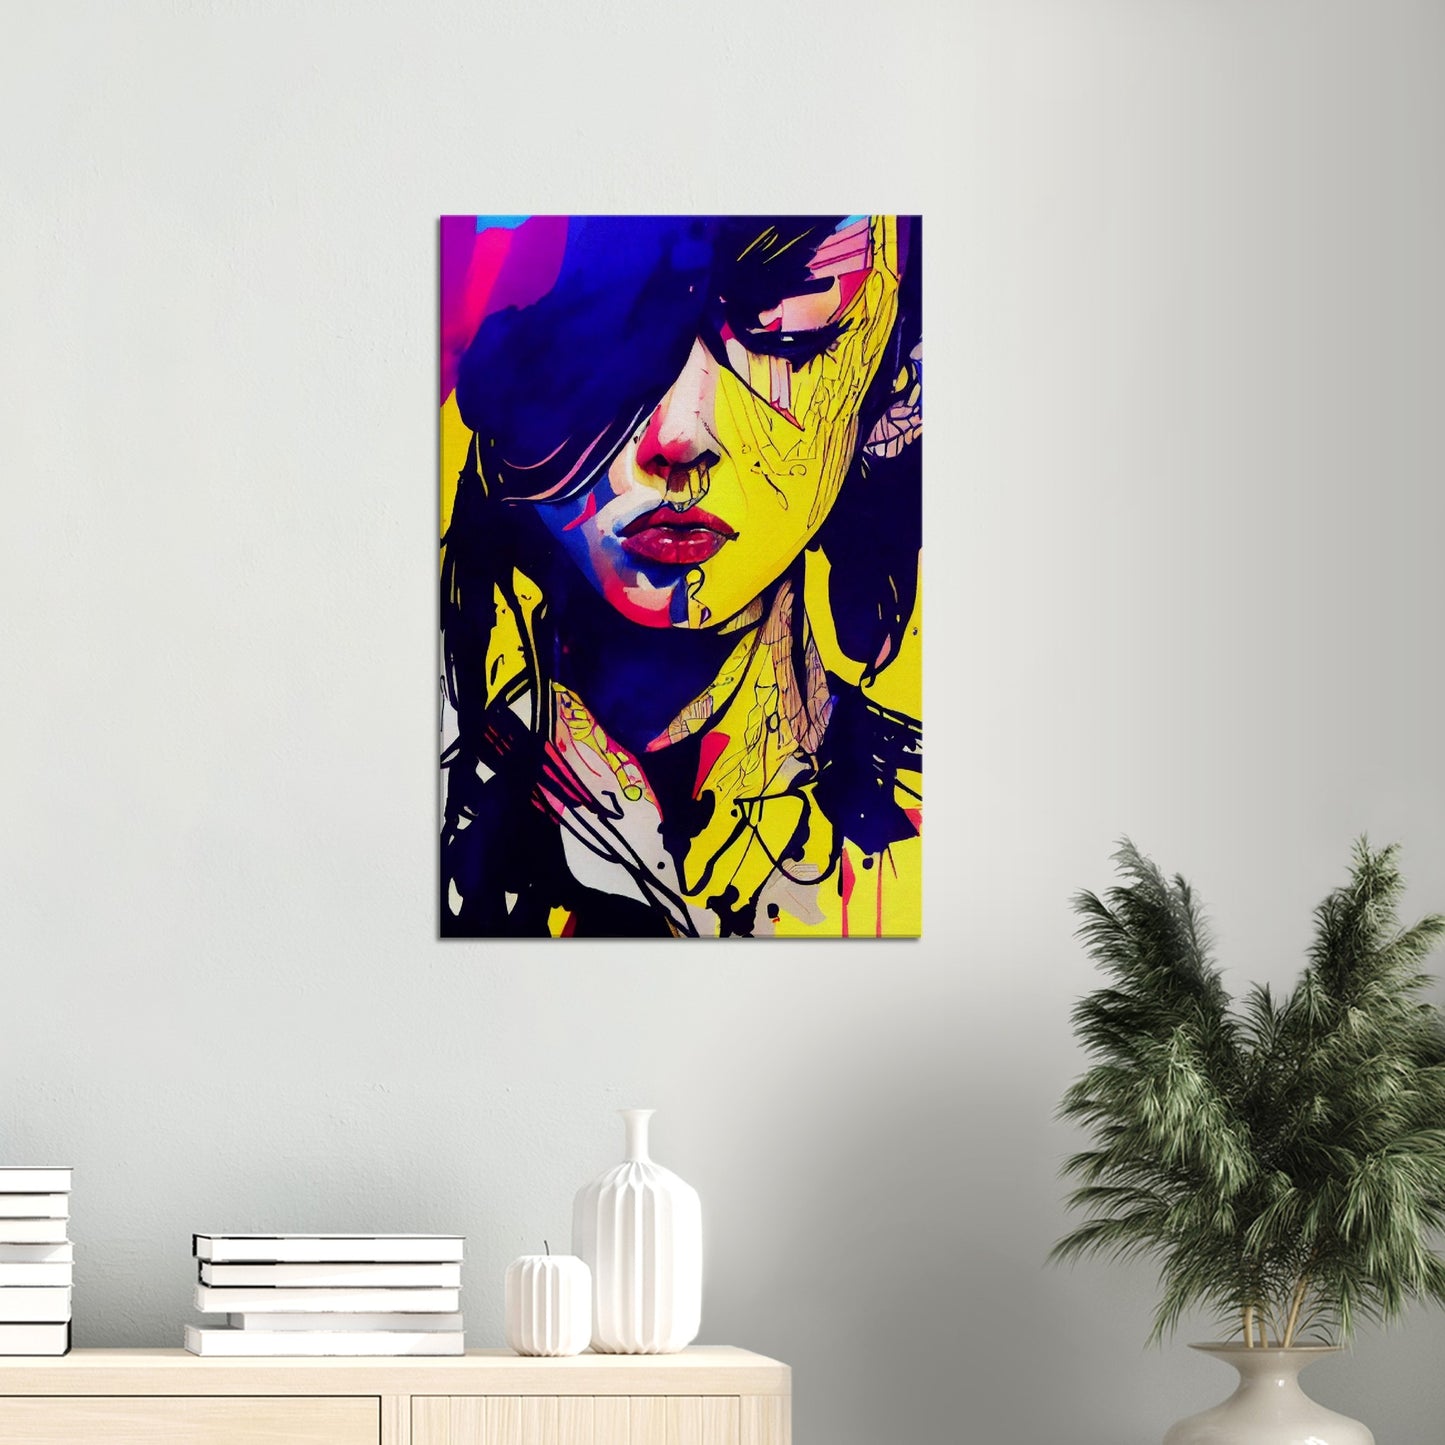 Girl with closed eyes - Urban Art on Canvas